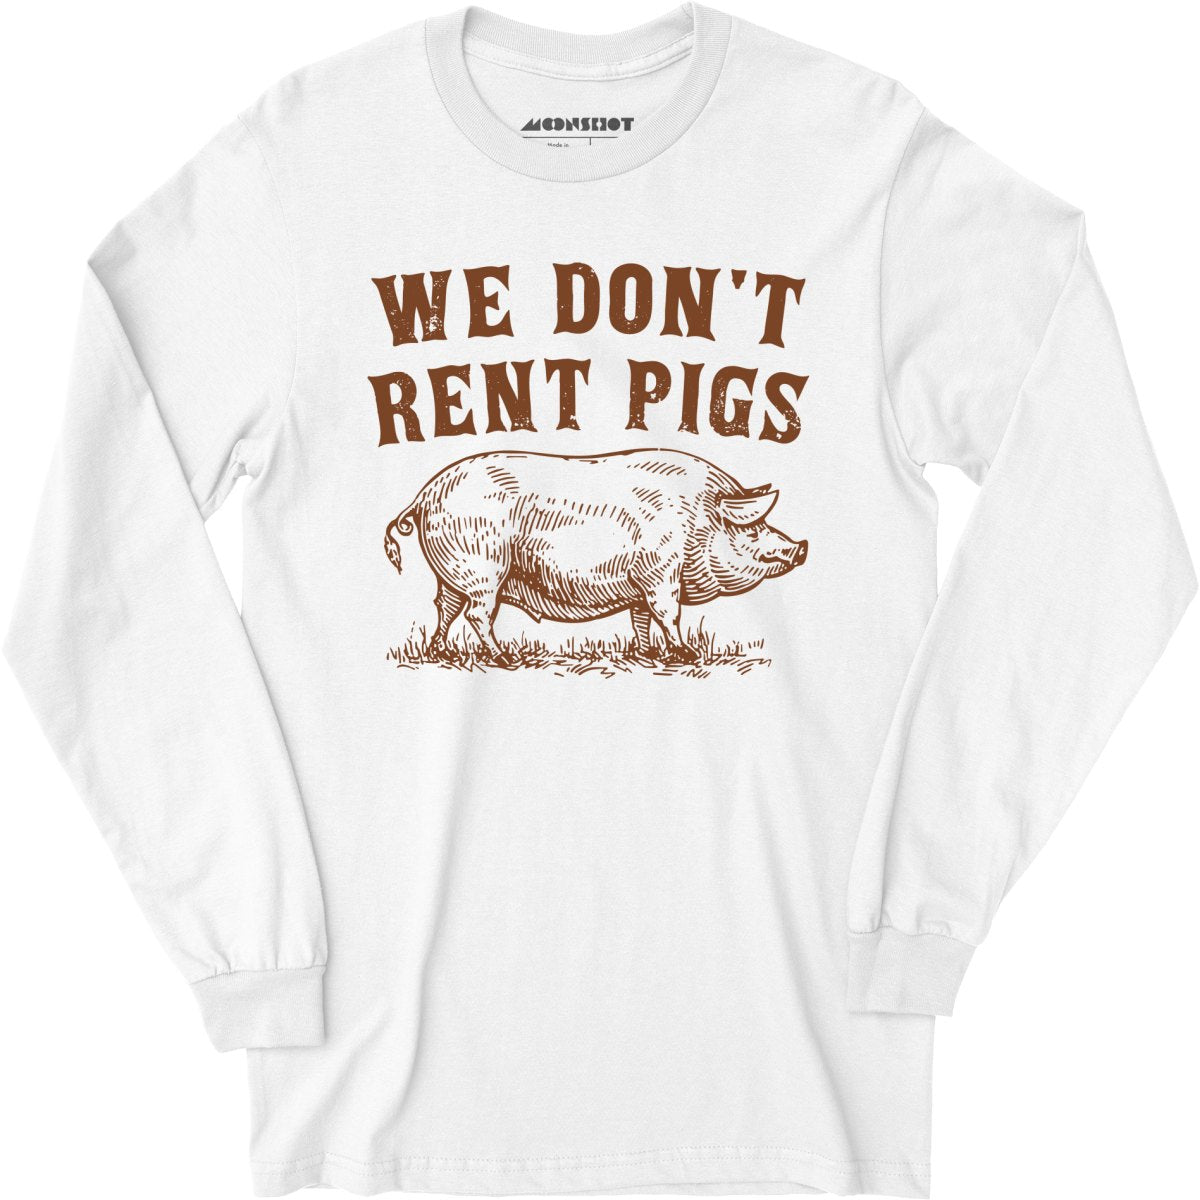 We Don't Rent Pigs - Long Sleeve T-Shirt